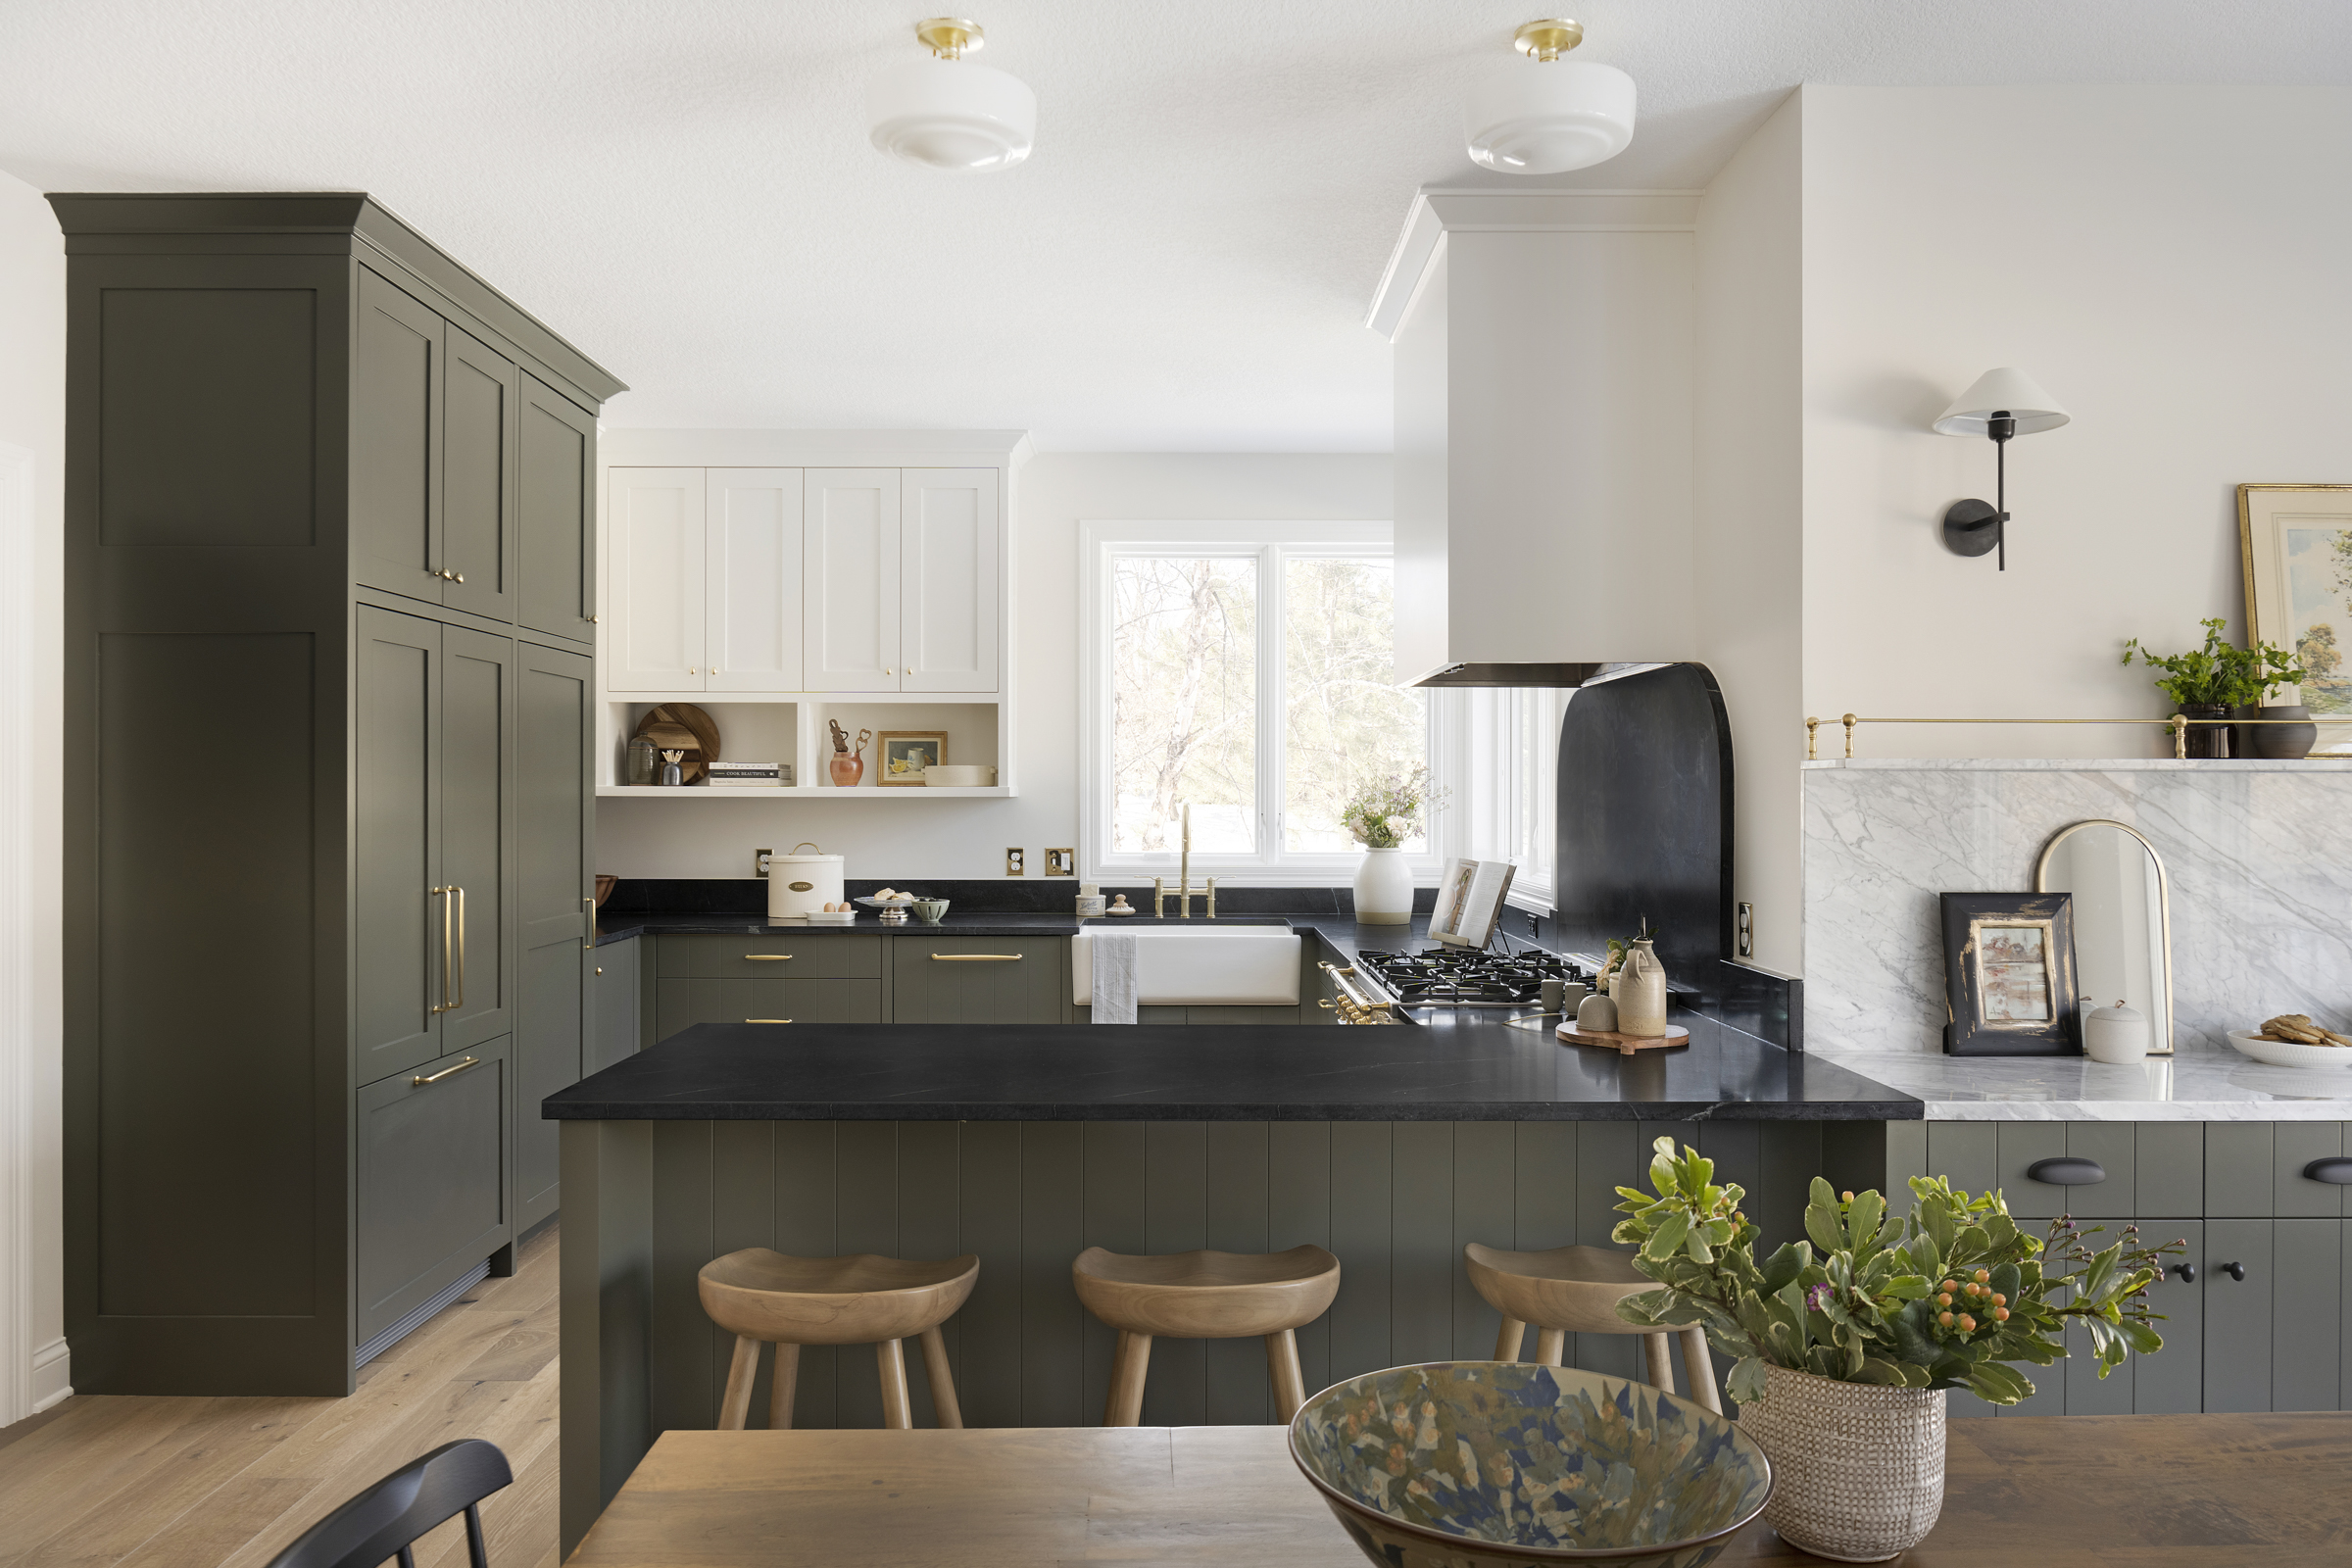 Two tone kitchen cabinetry with natural soapstone countertops, La Carnue range, brass details.